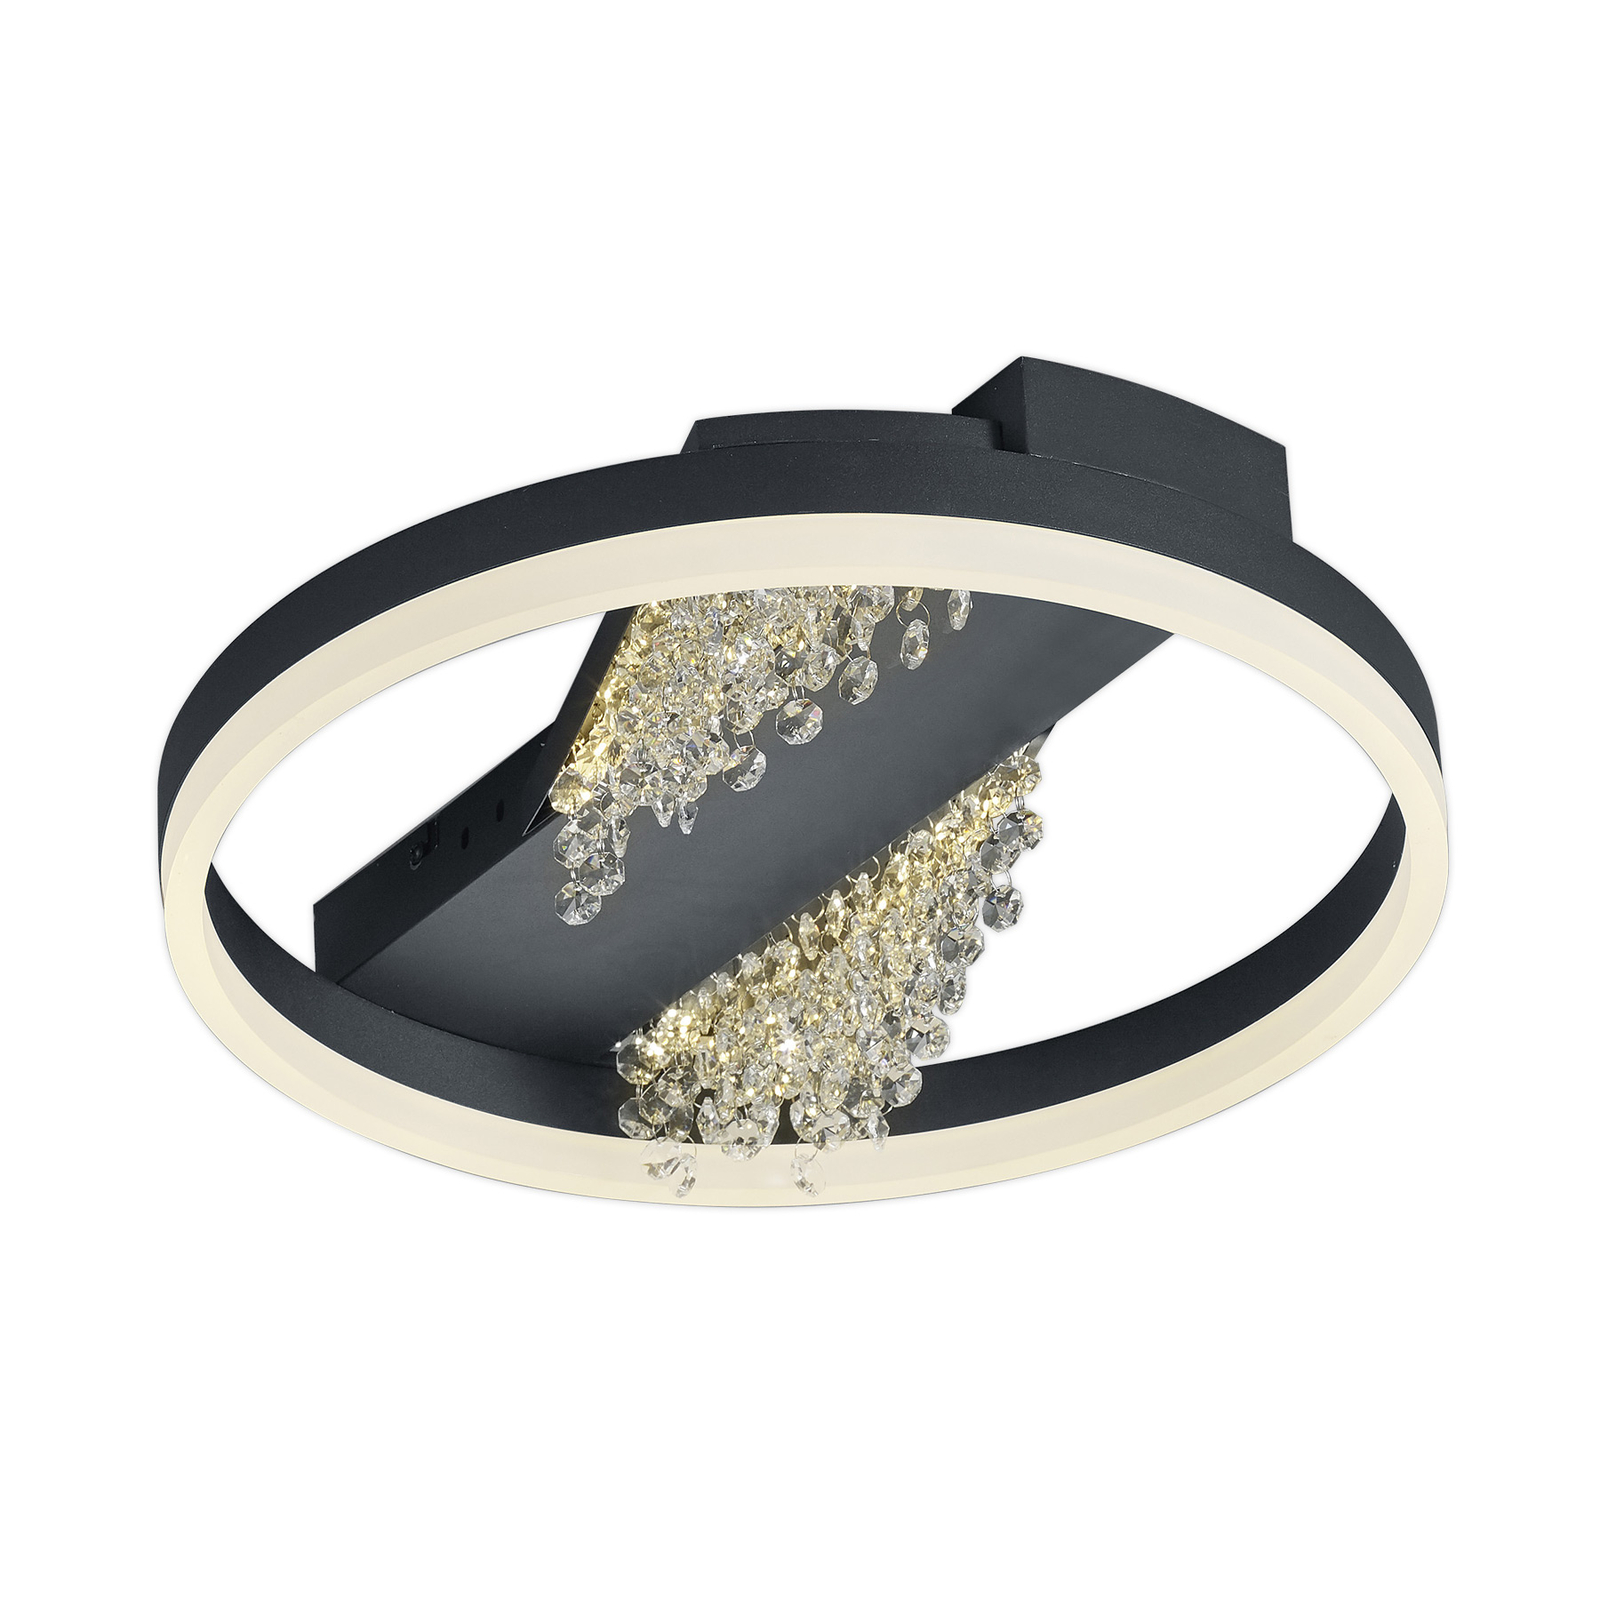 Dunja LED ceiling light with a crystal look, black